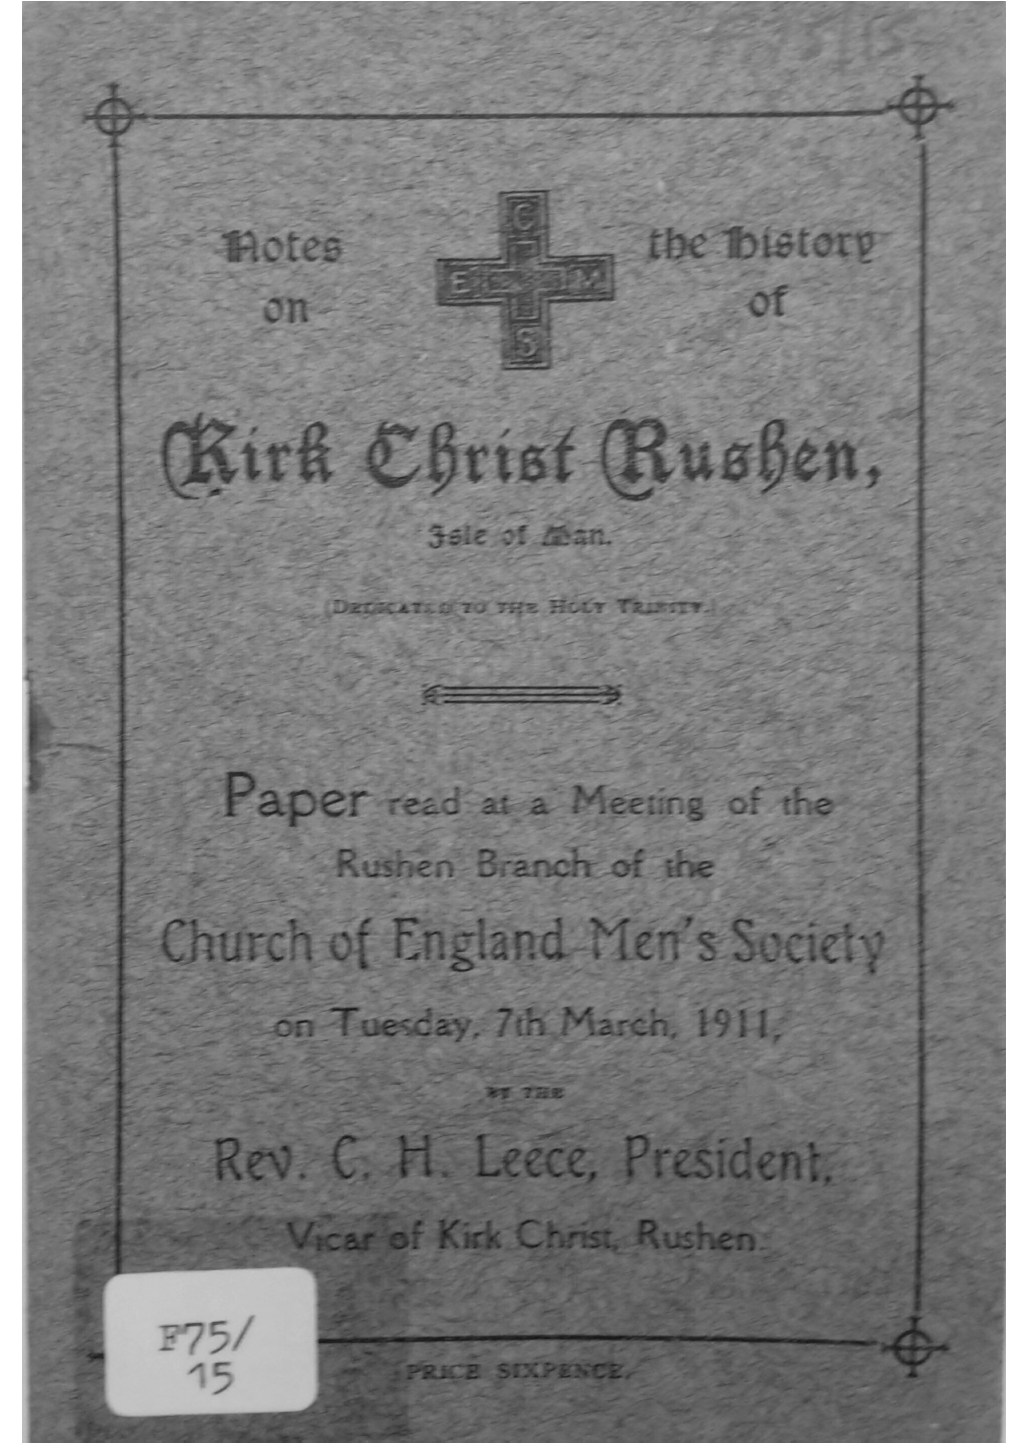 KIRK CHRIST RUSHEN,” “Rushen” Is Said to Be a Corruption of “Russien,” a Disciple of St